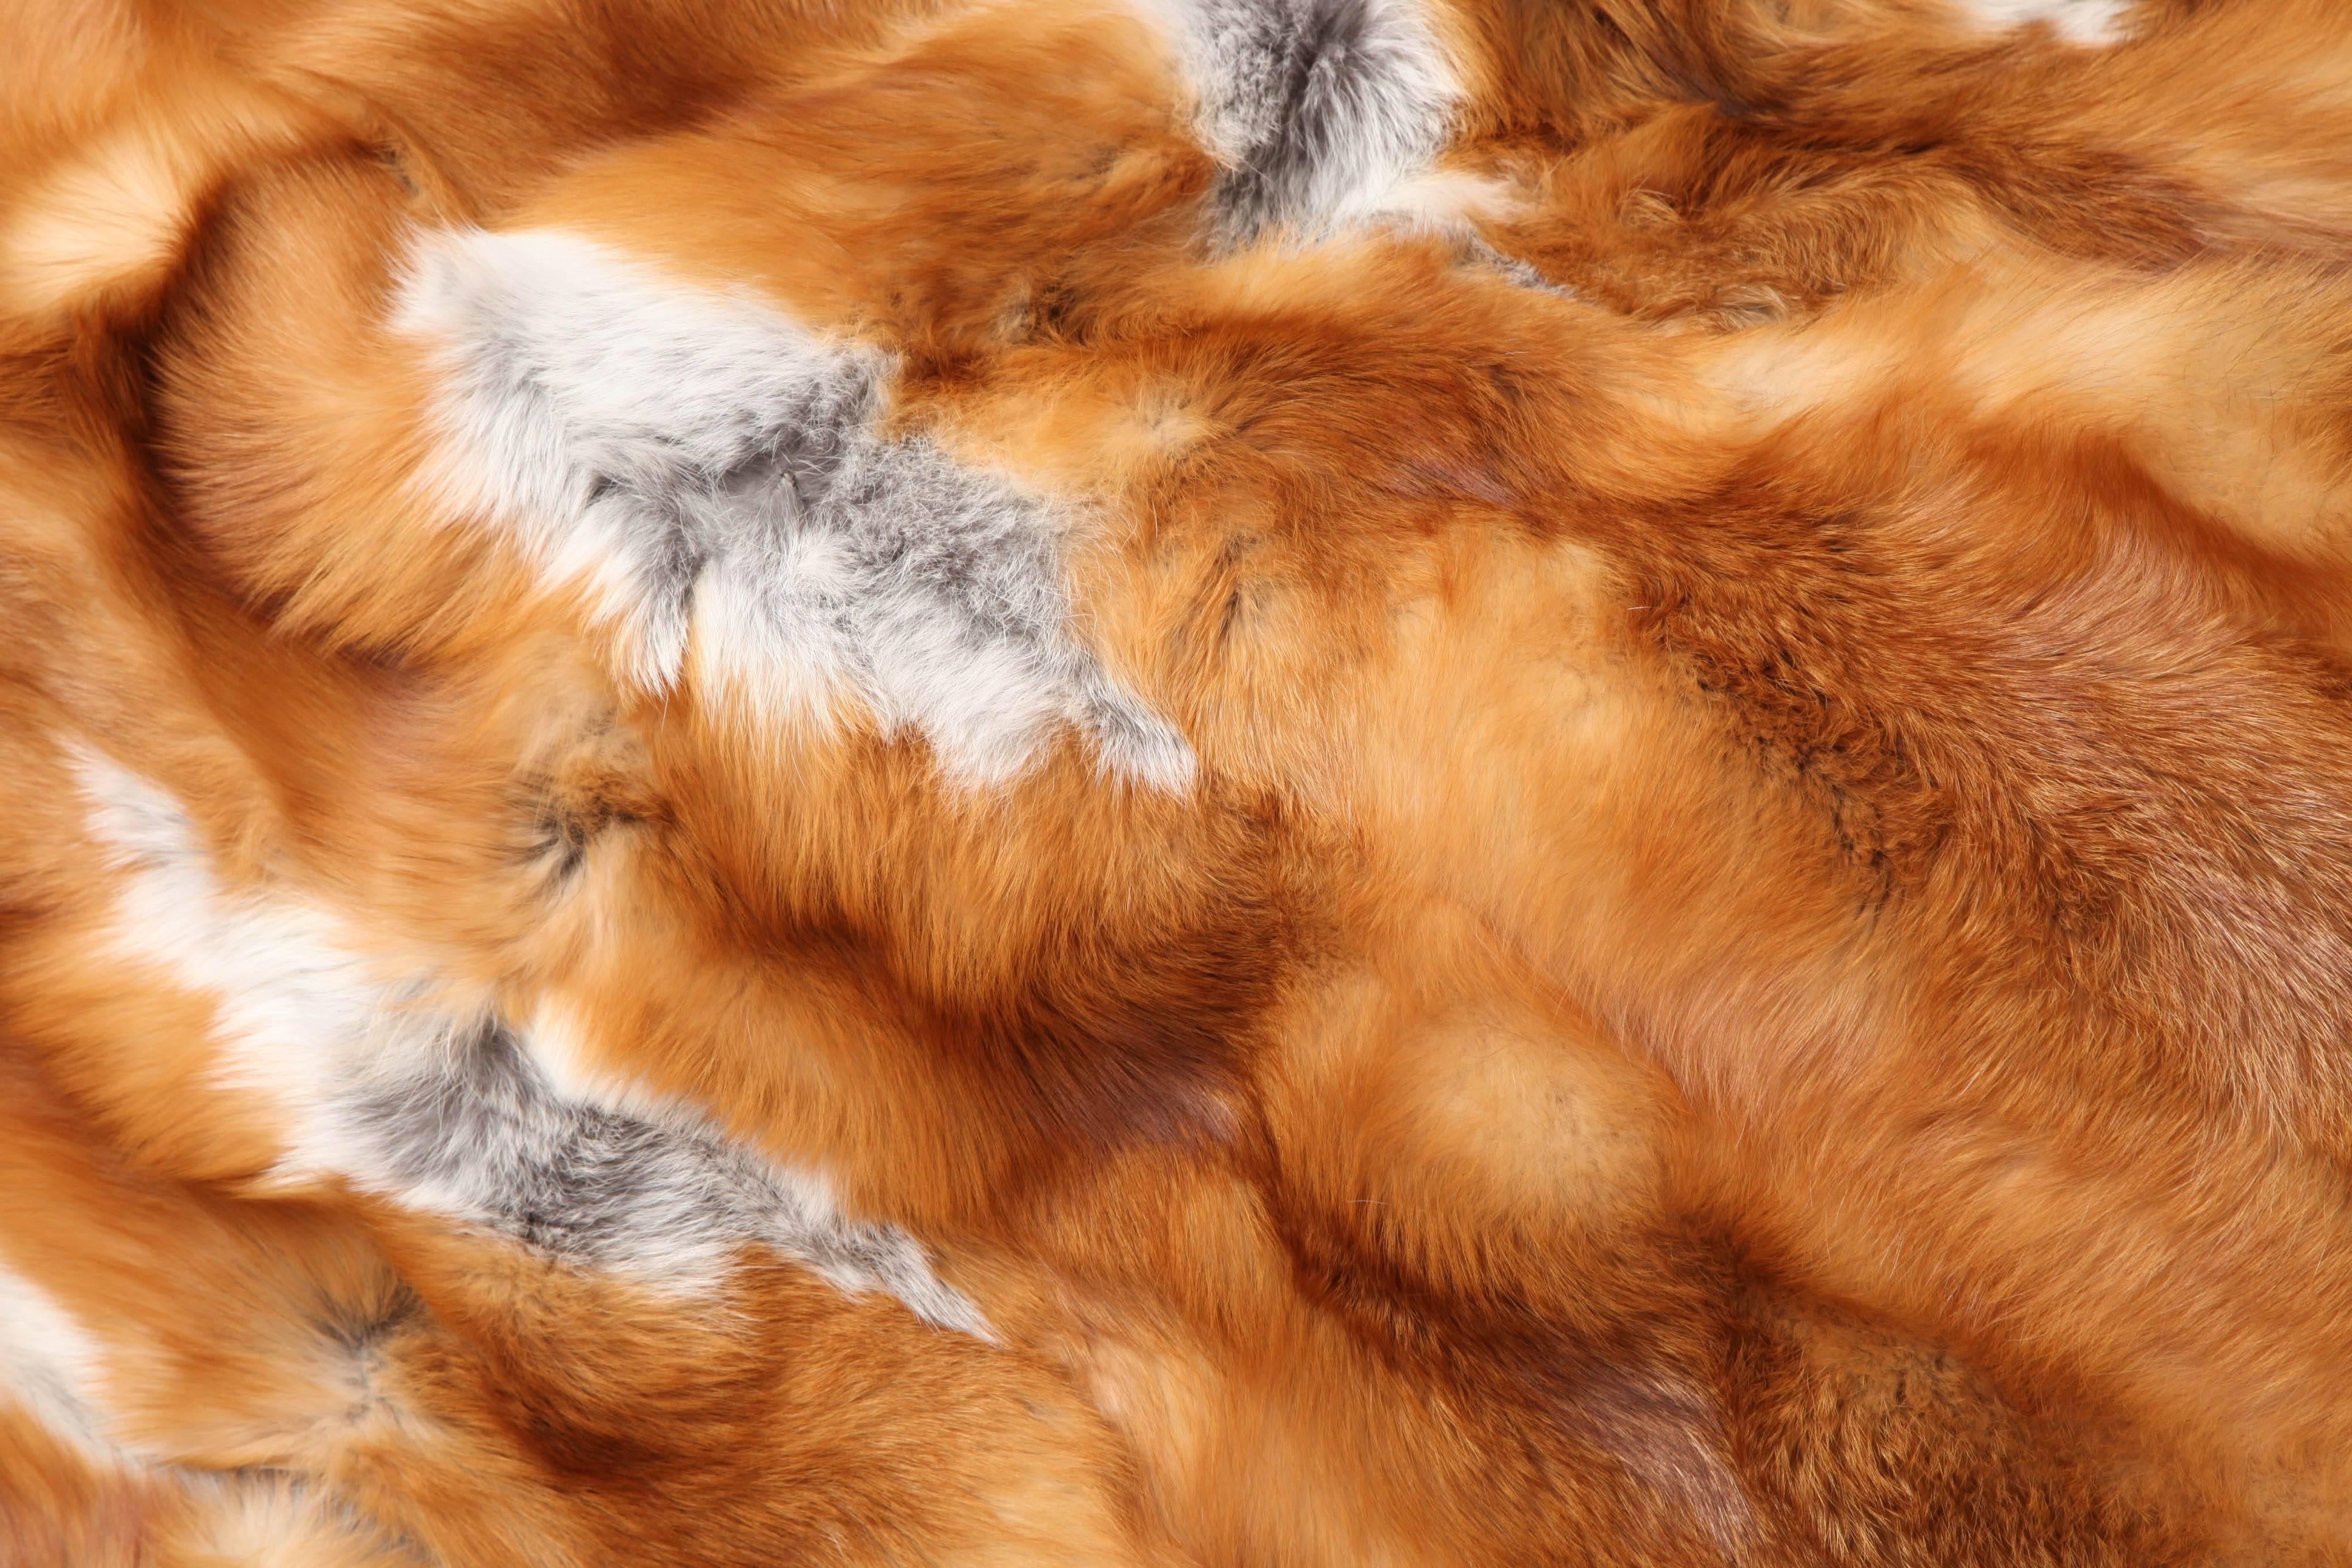 Decorative vintage fox throw, full skins.
This one just sold but we can make a new throw in about 7-10 days.